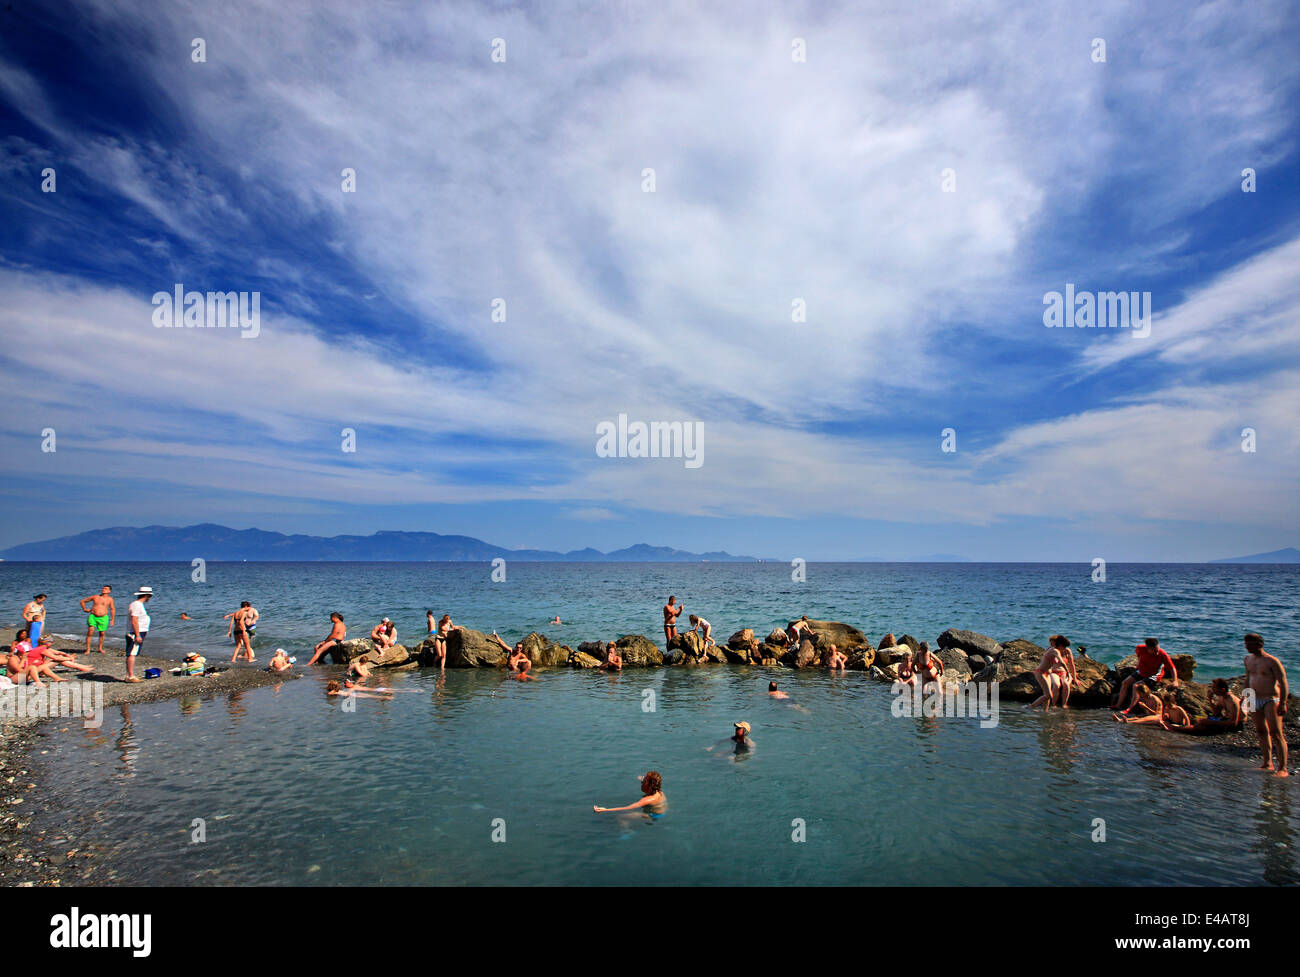 Enjoying a natural spa at the thermal springs of Therma (or 'Empros Thermes') beach, Kos island, Dodecanese, Greece. Stock Photo